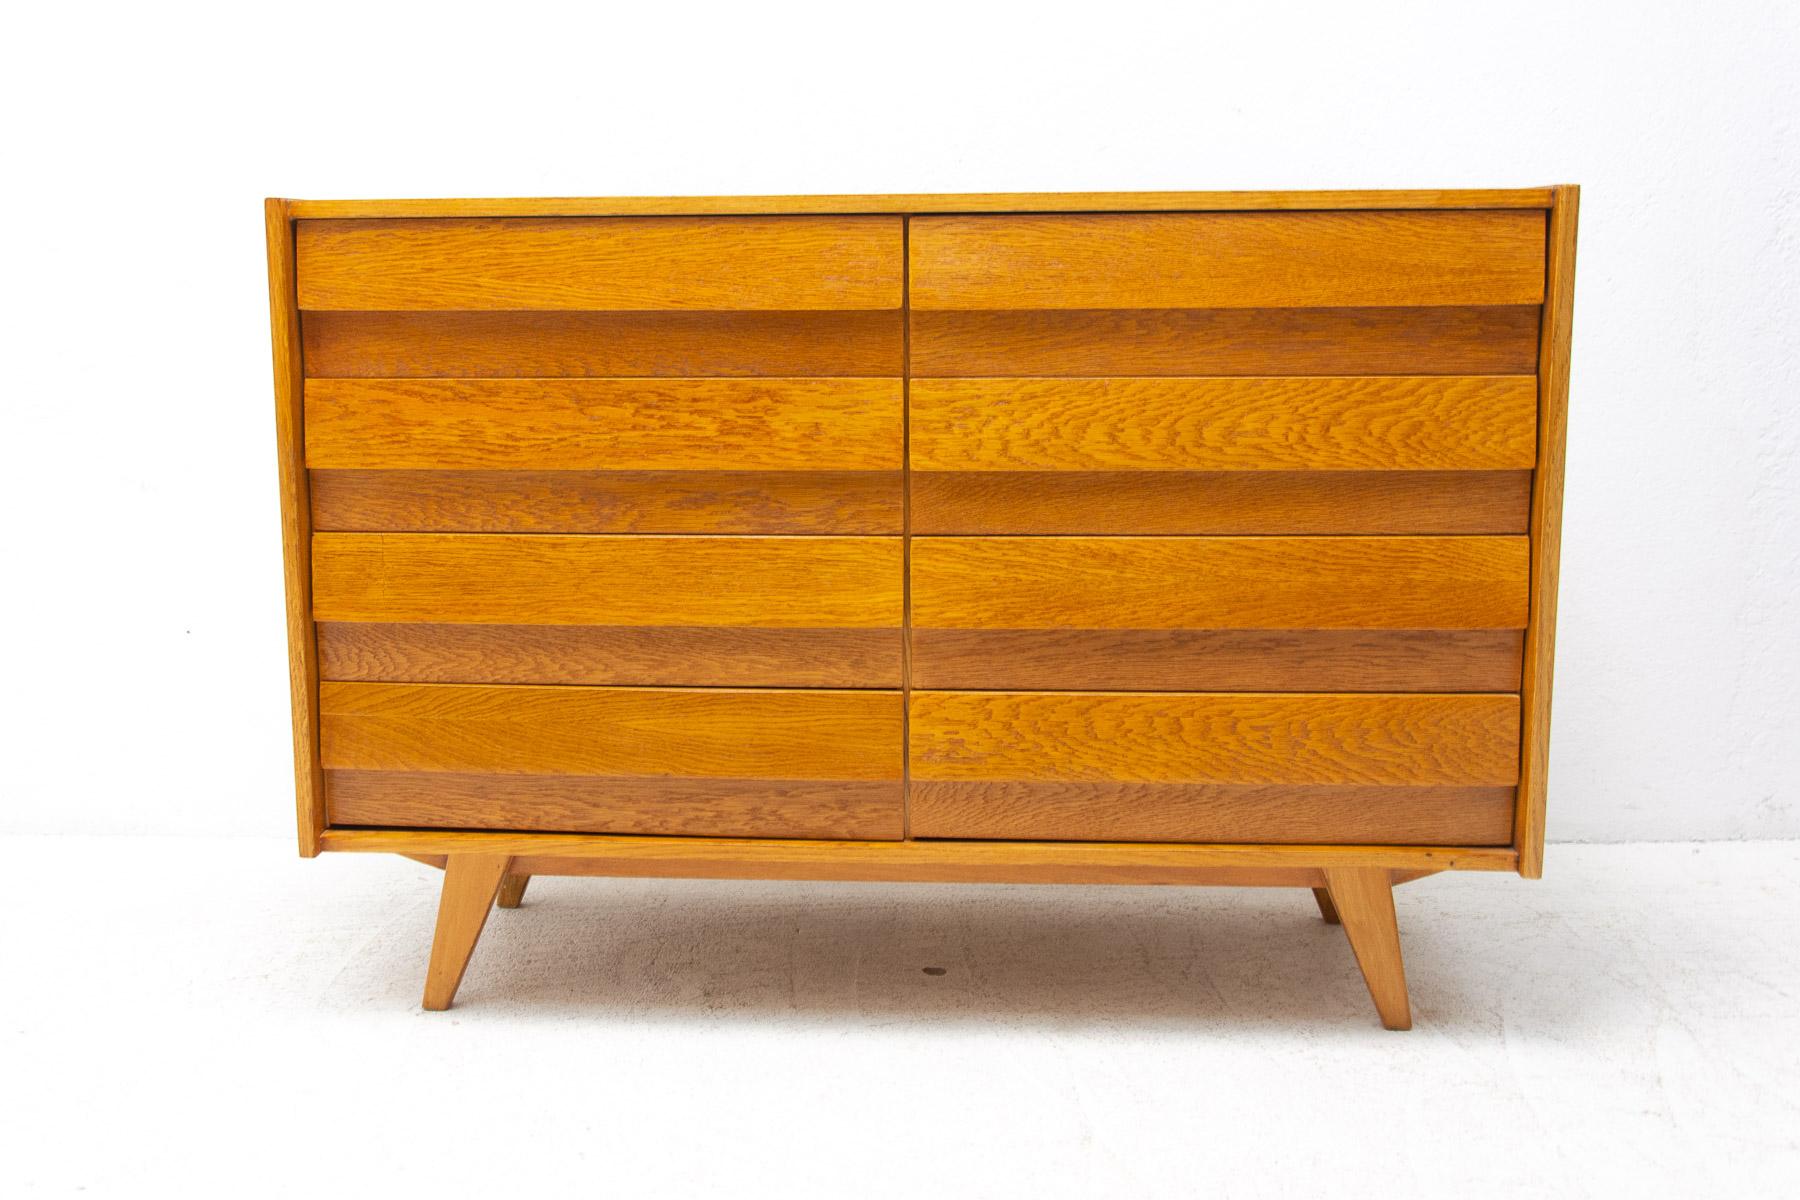 Mid century chest of drawers, model no. U-453, designed by Jirí Jiroutek for Interiér Praha. It was made in the former Czechoslovakia in the 1960´s. This model is associated with the world-famous EXPO 58 in Brussels. It´s made of oak wood and and